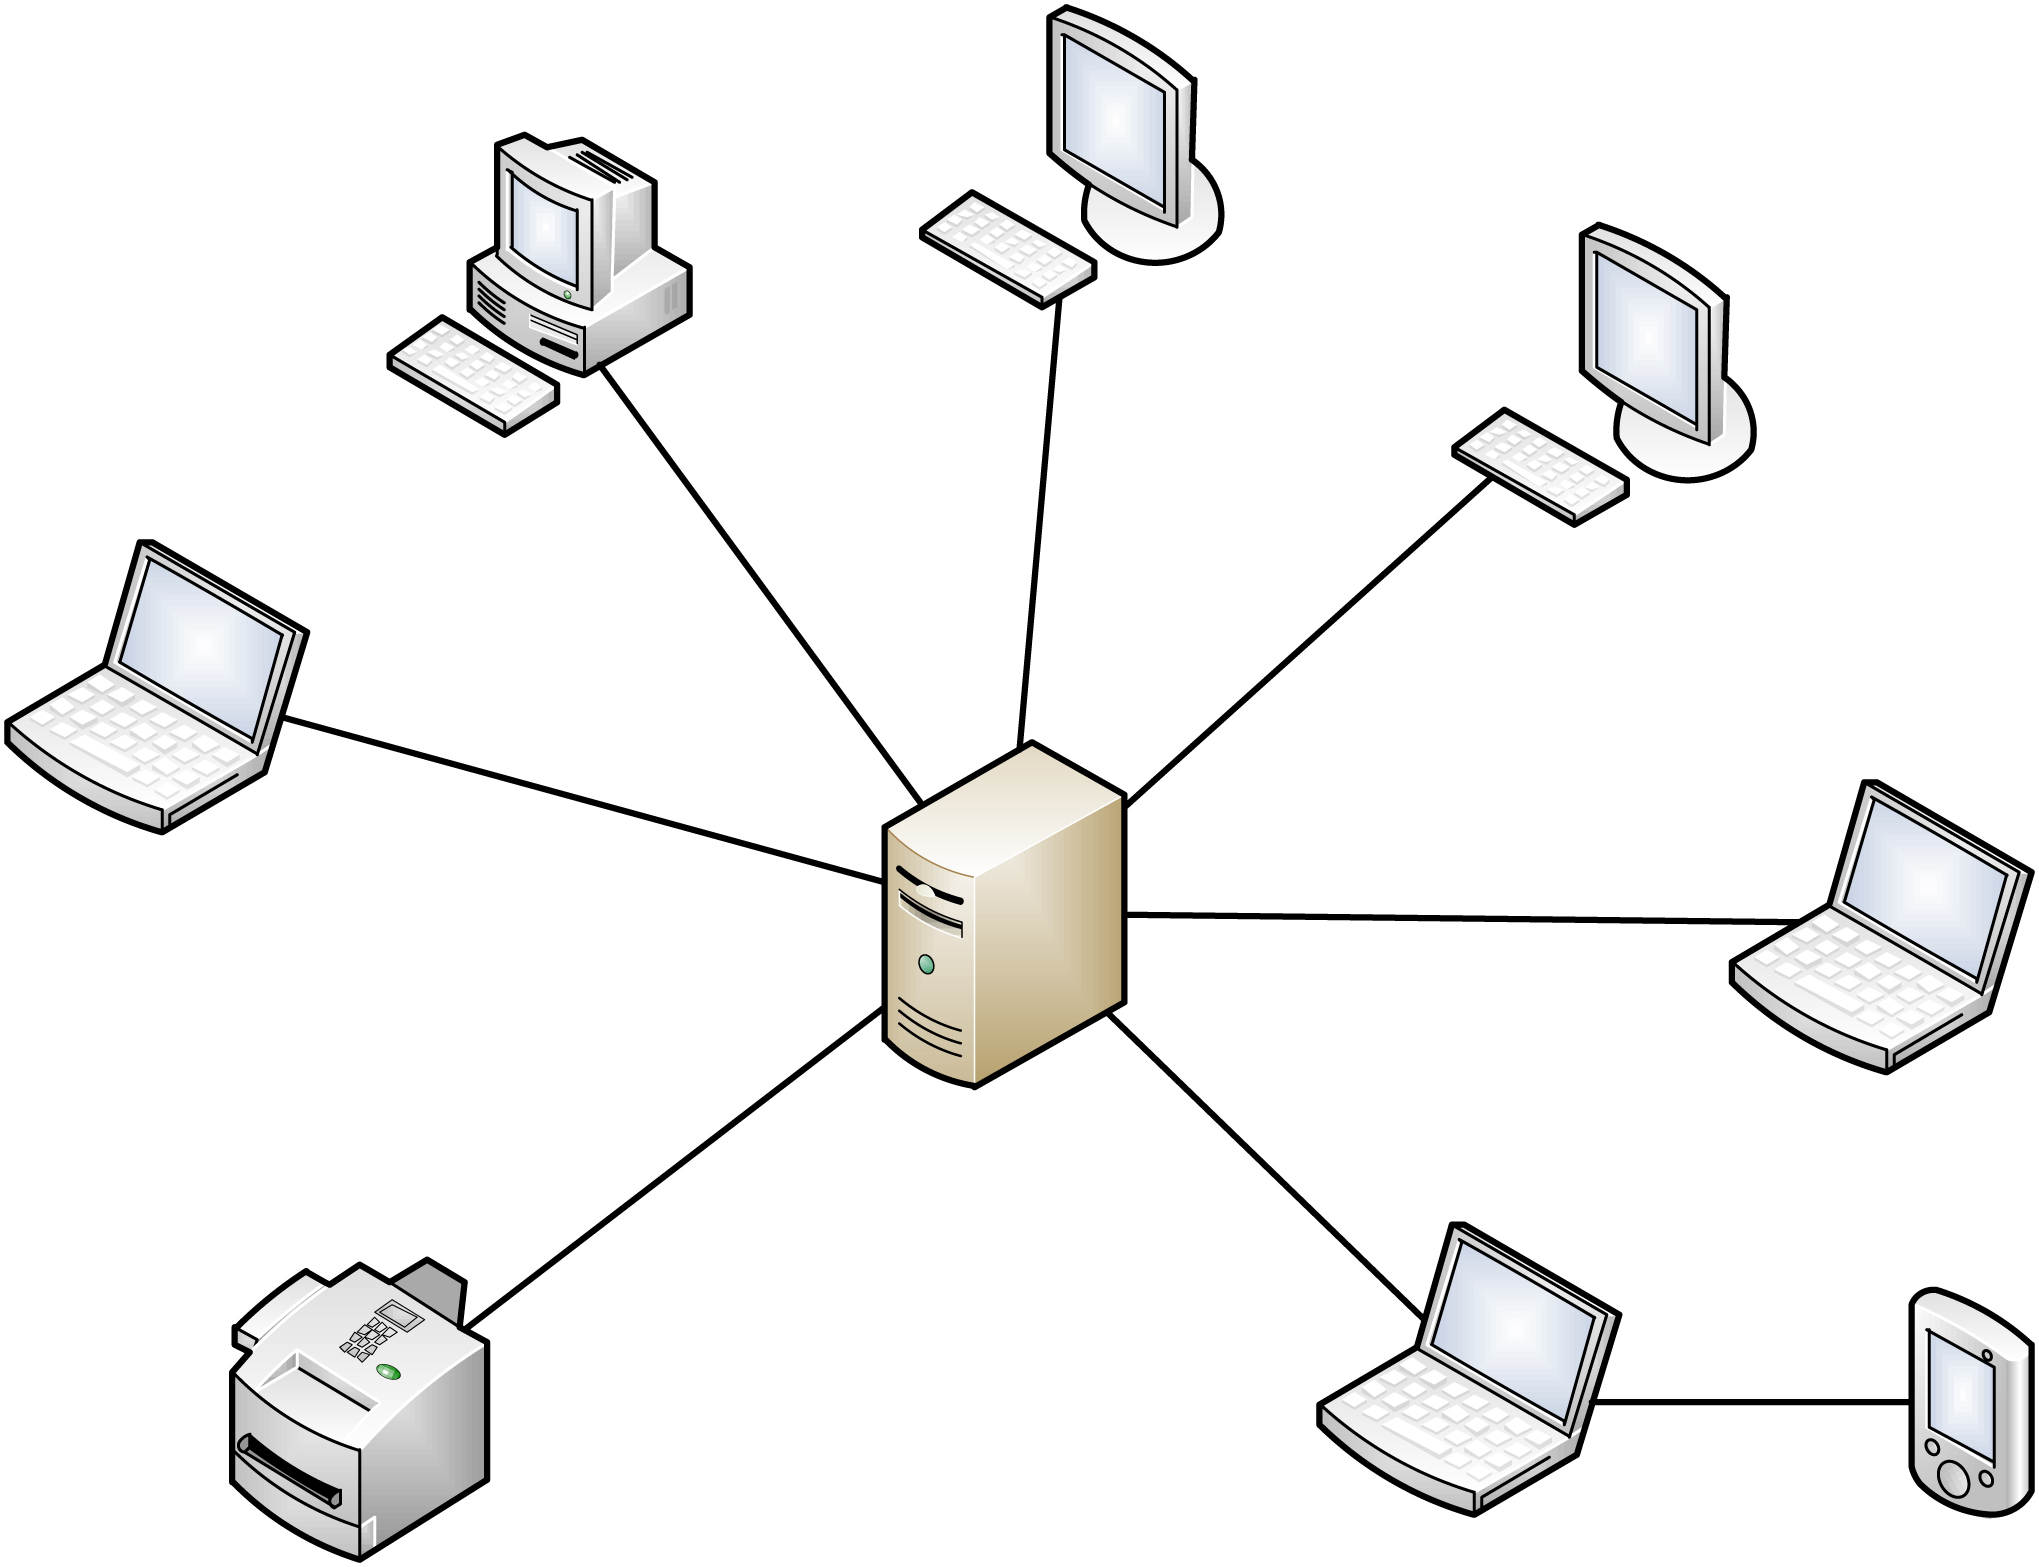 Top 10 Reasons to Setup a Client-Server Network - IT Peer Network 